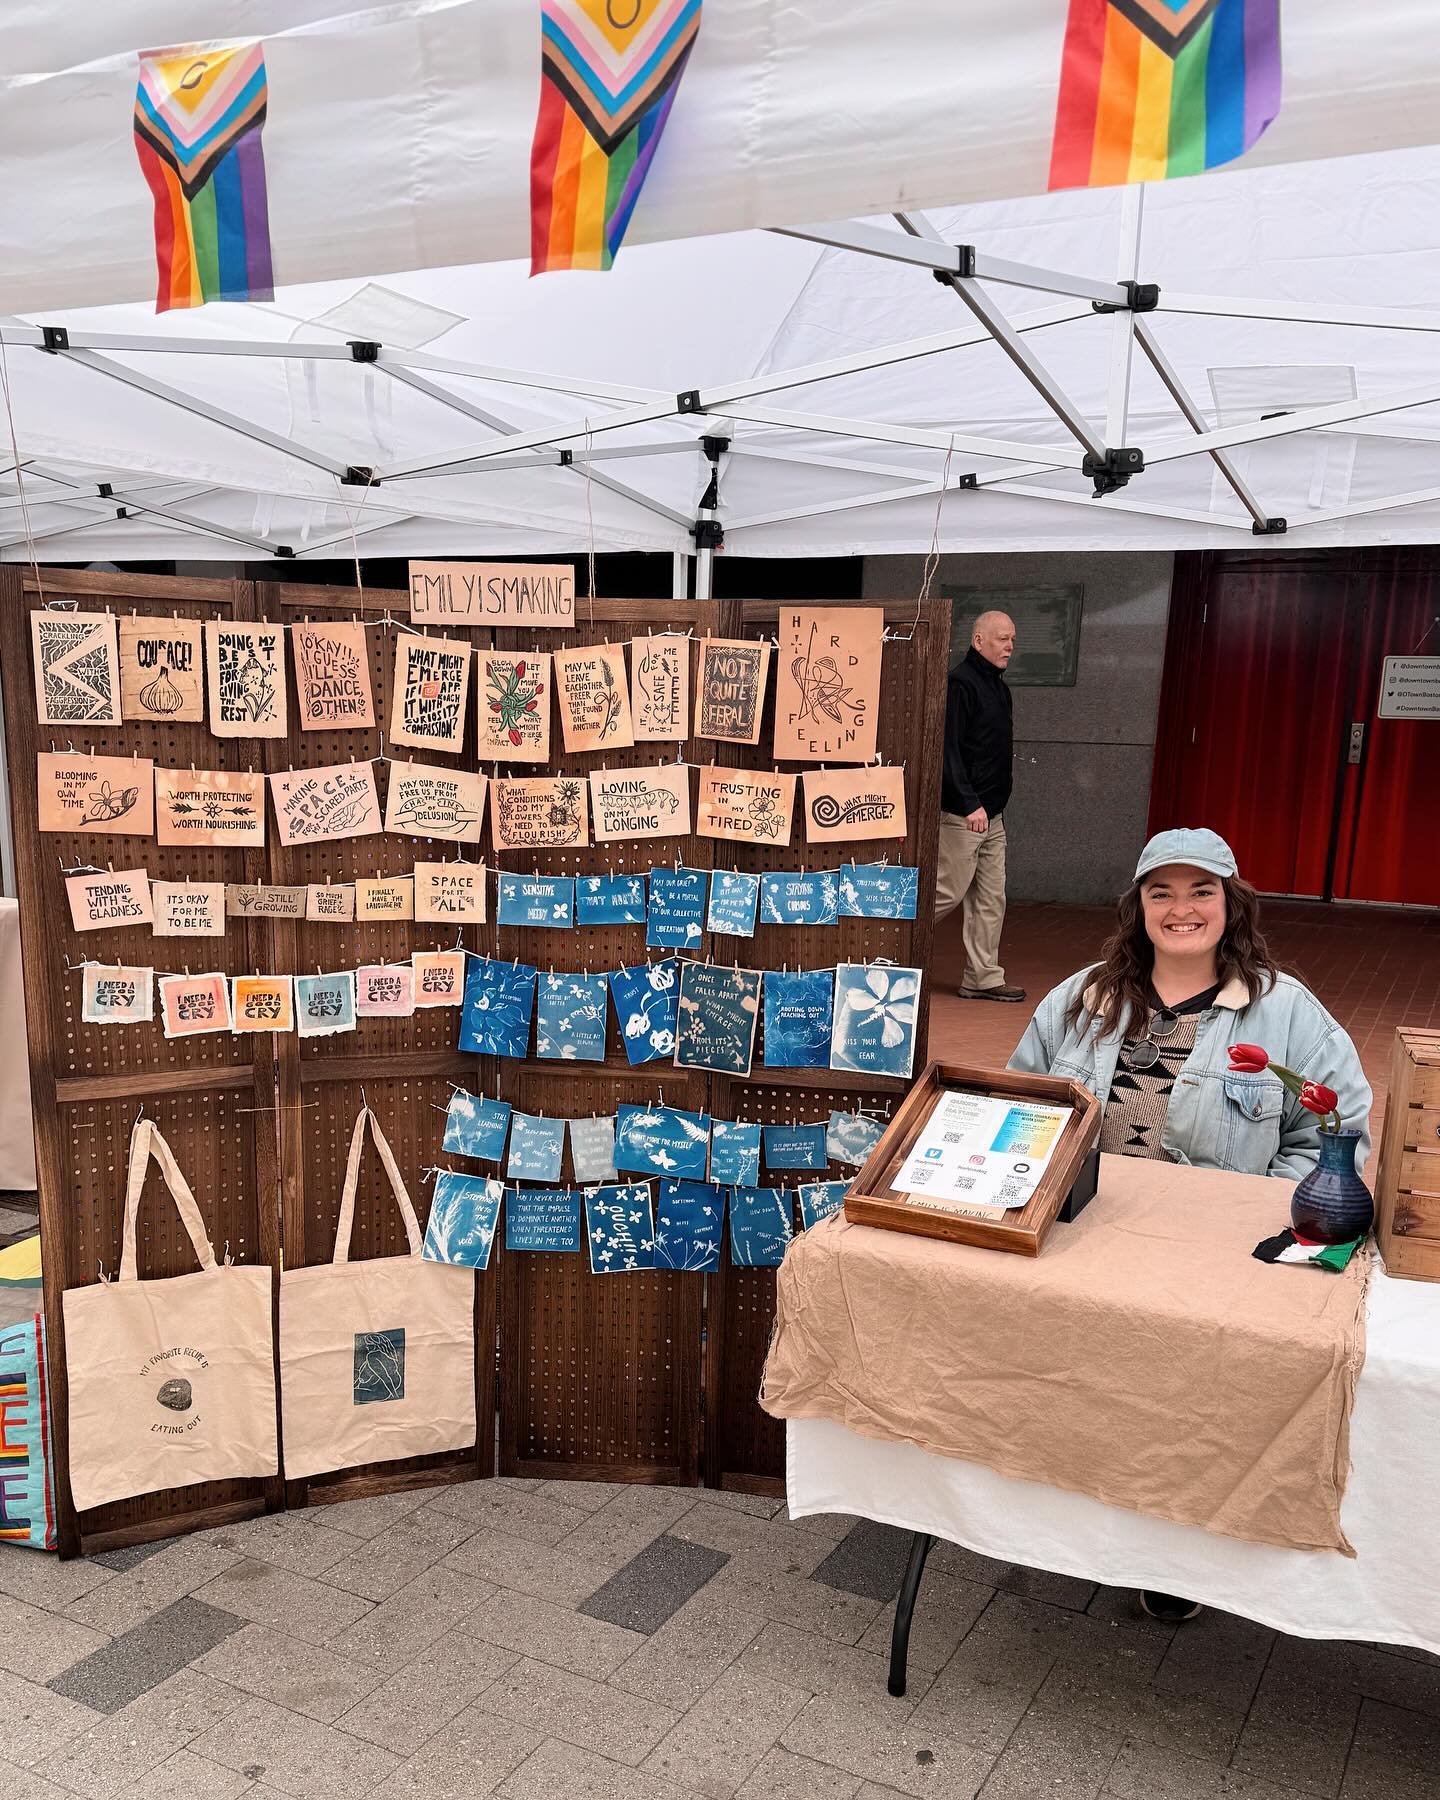 All set up for @tqncboston &lsquo;s queer artists market at downtown crossing - come out and say hi from 12:30-3:30! ✨🏳️&zwj;🌈🏳️&zwj;⚧️🏳️&zwj;🌈🏳️&zwj;⚧️✨

Thanks to my talented tent-mate @swirlsnstones for the photo!